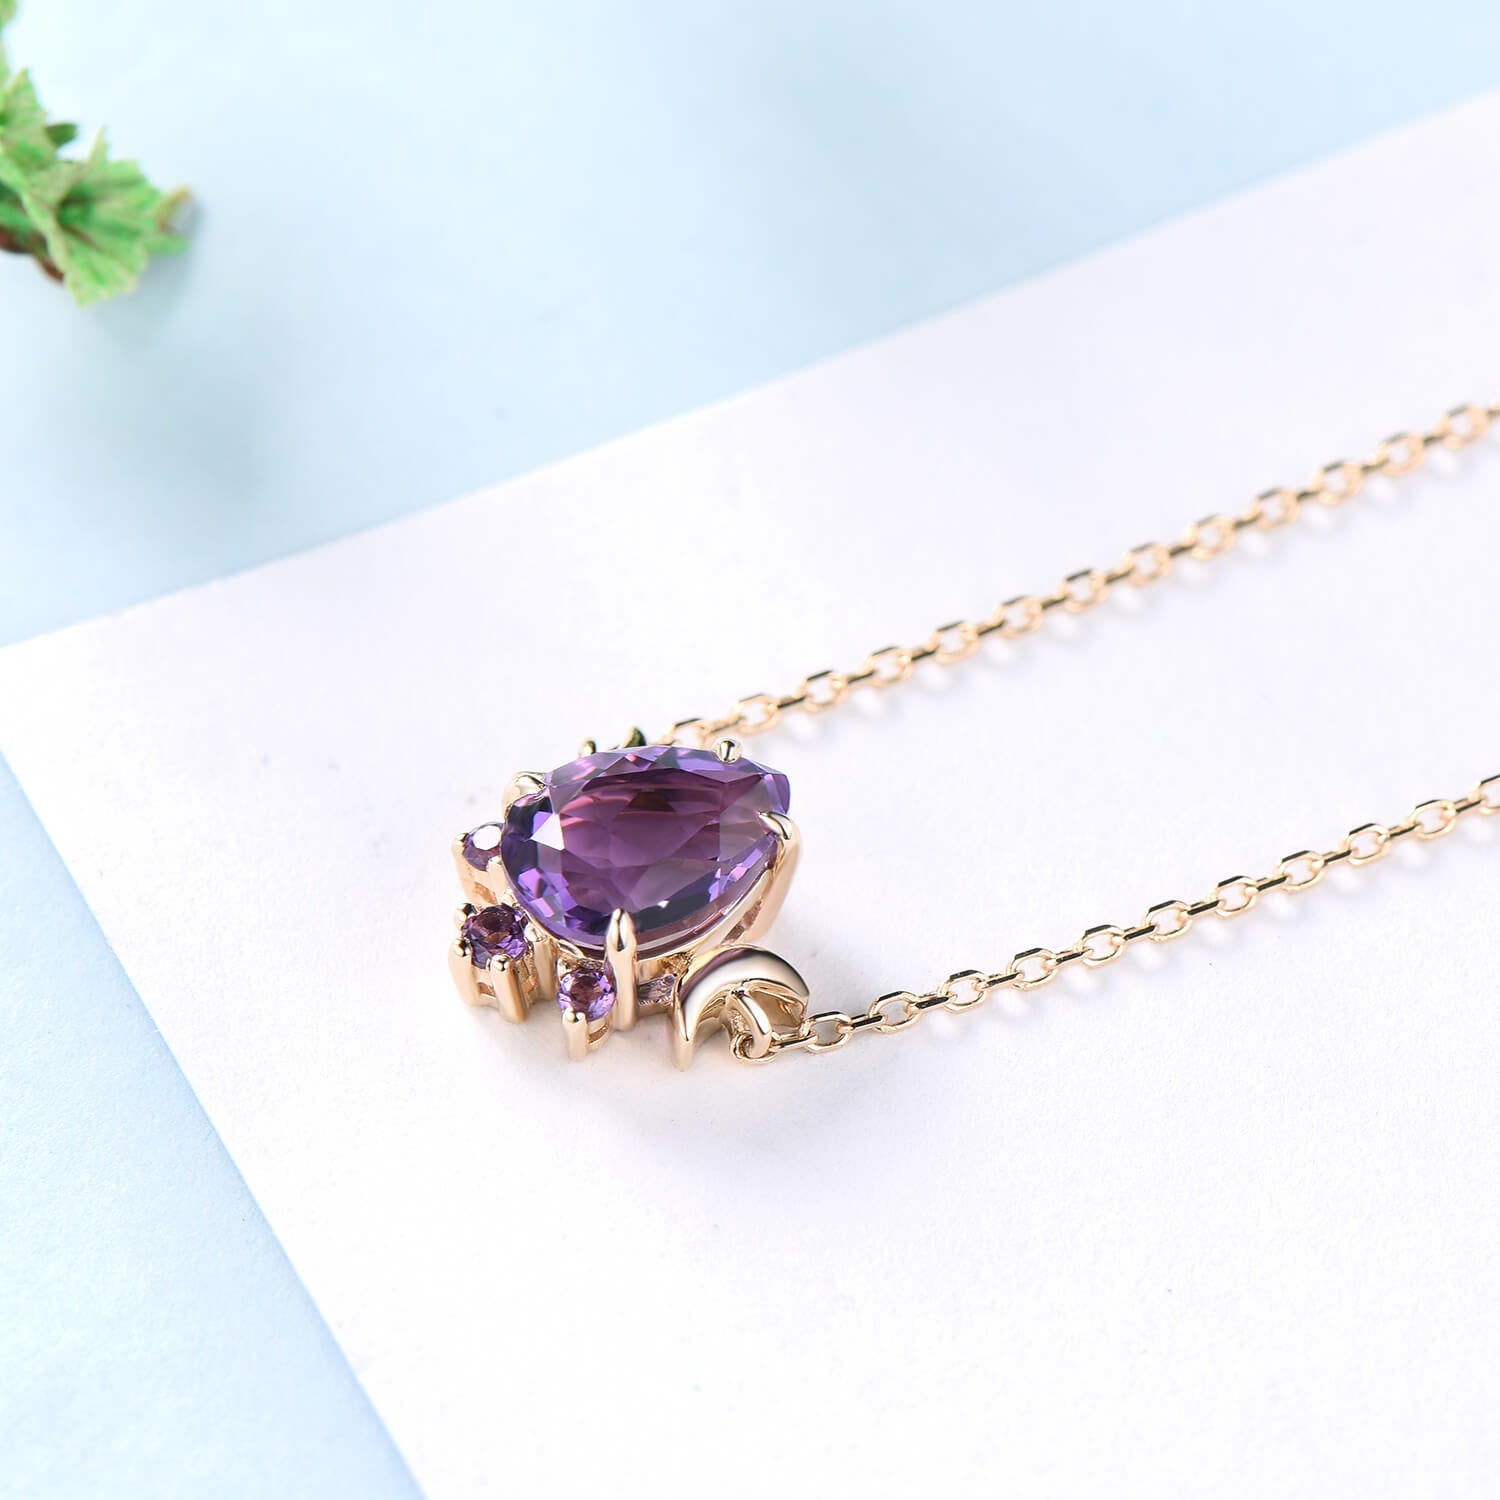 Dainty Pear Shaped Amethyst Pendant necklace Unique Crescent moon purple amethyst necklace for women celestial anniversary gift for her - PENFINE